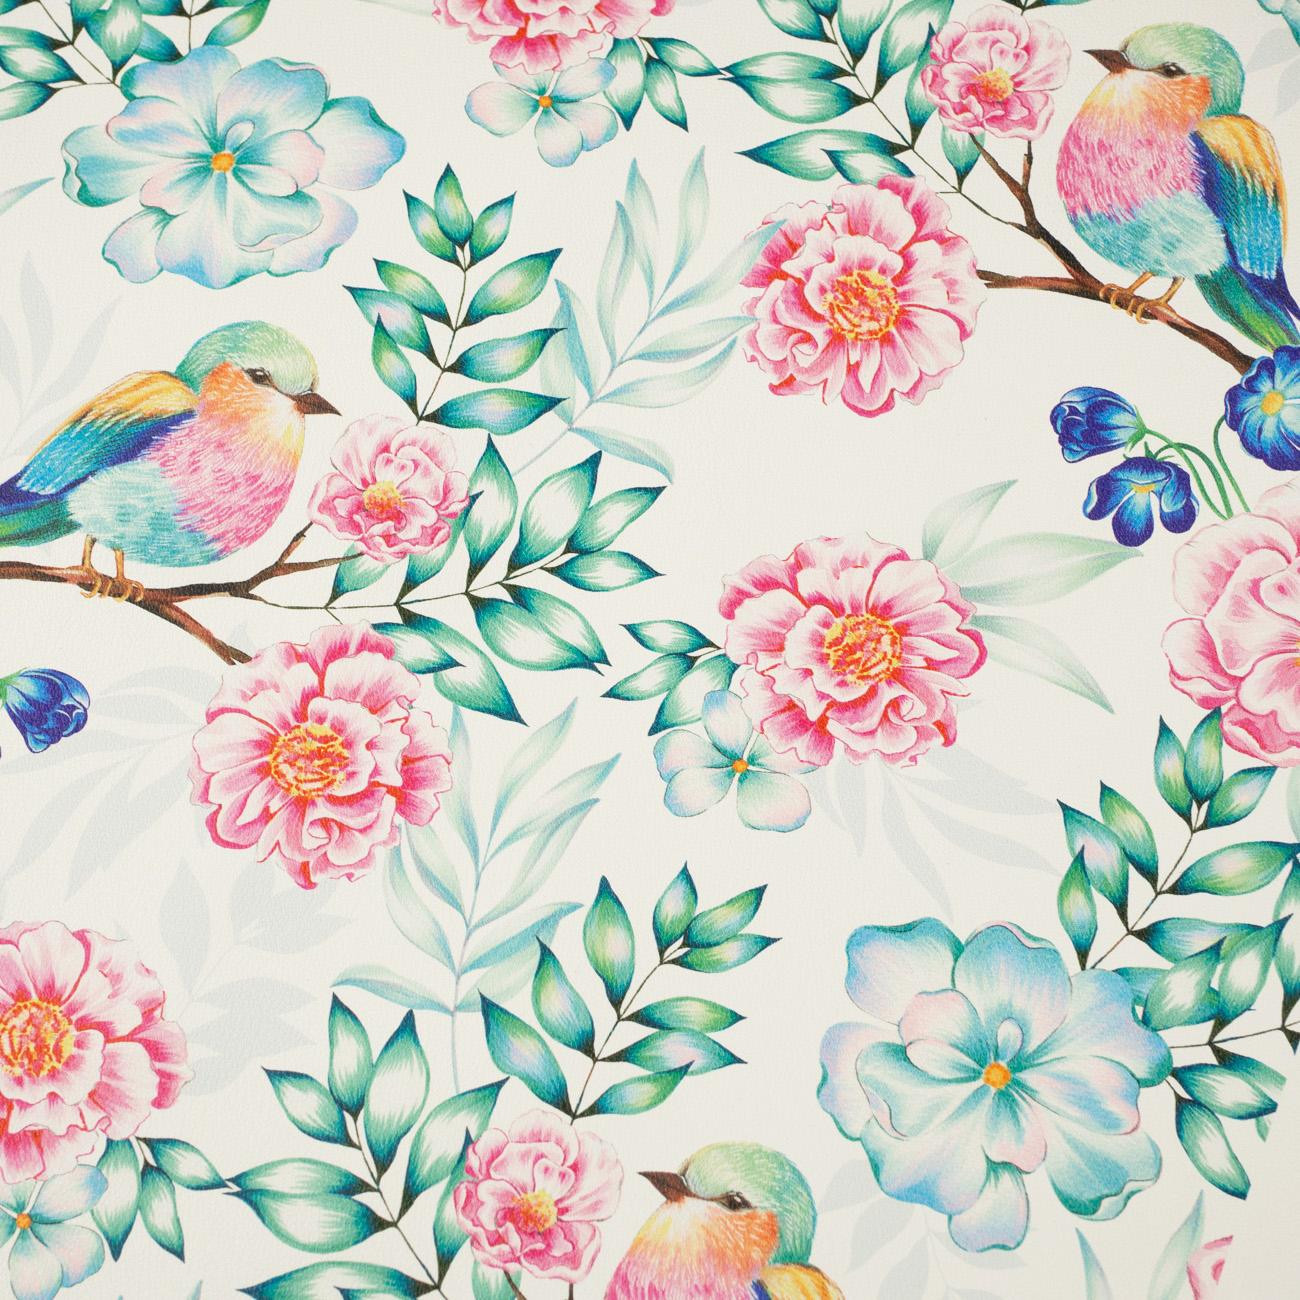 BIRDS AND FLOWERS - thick pressed leatherette